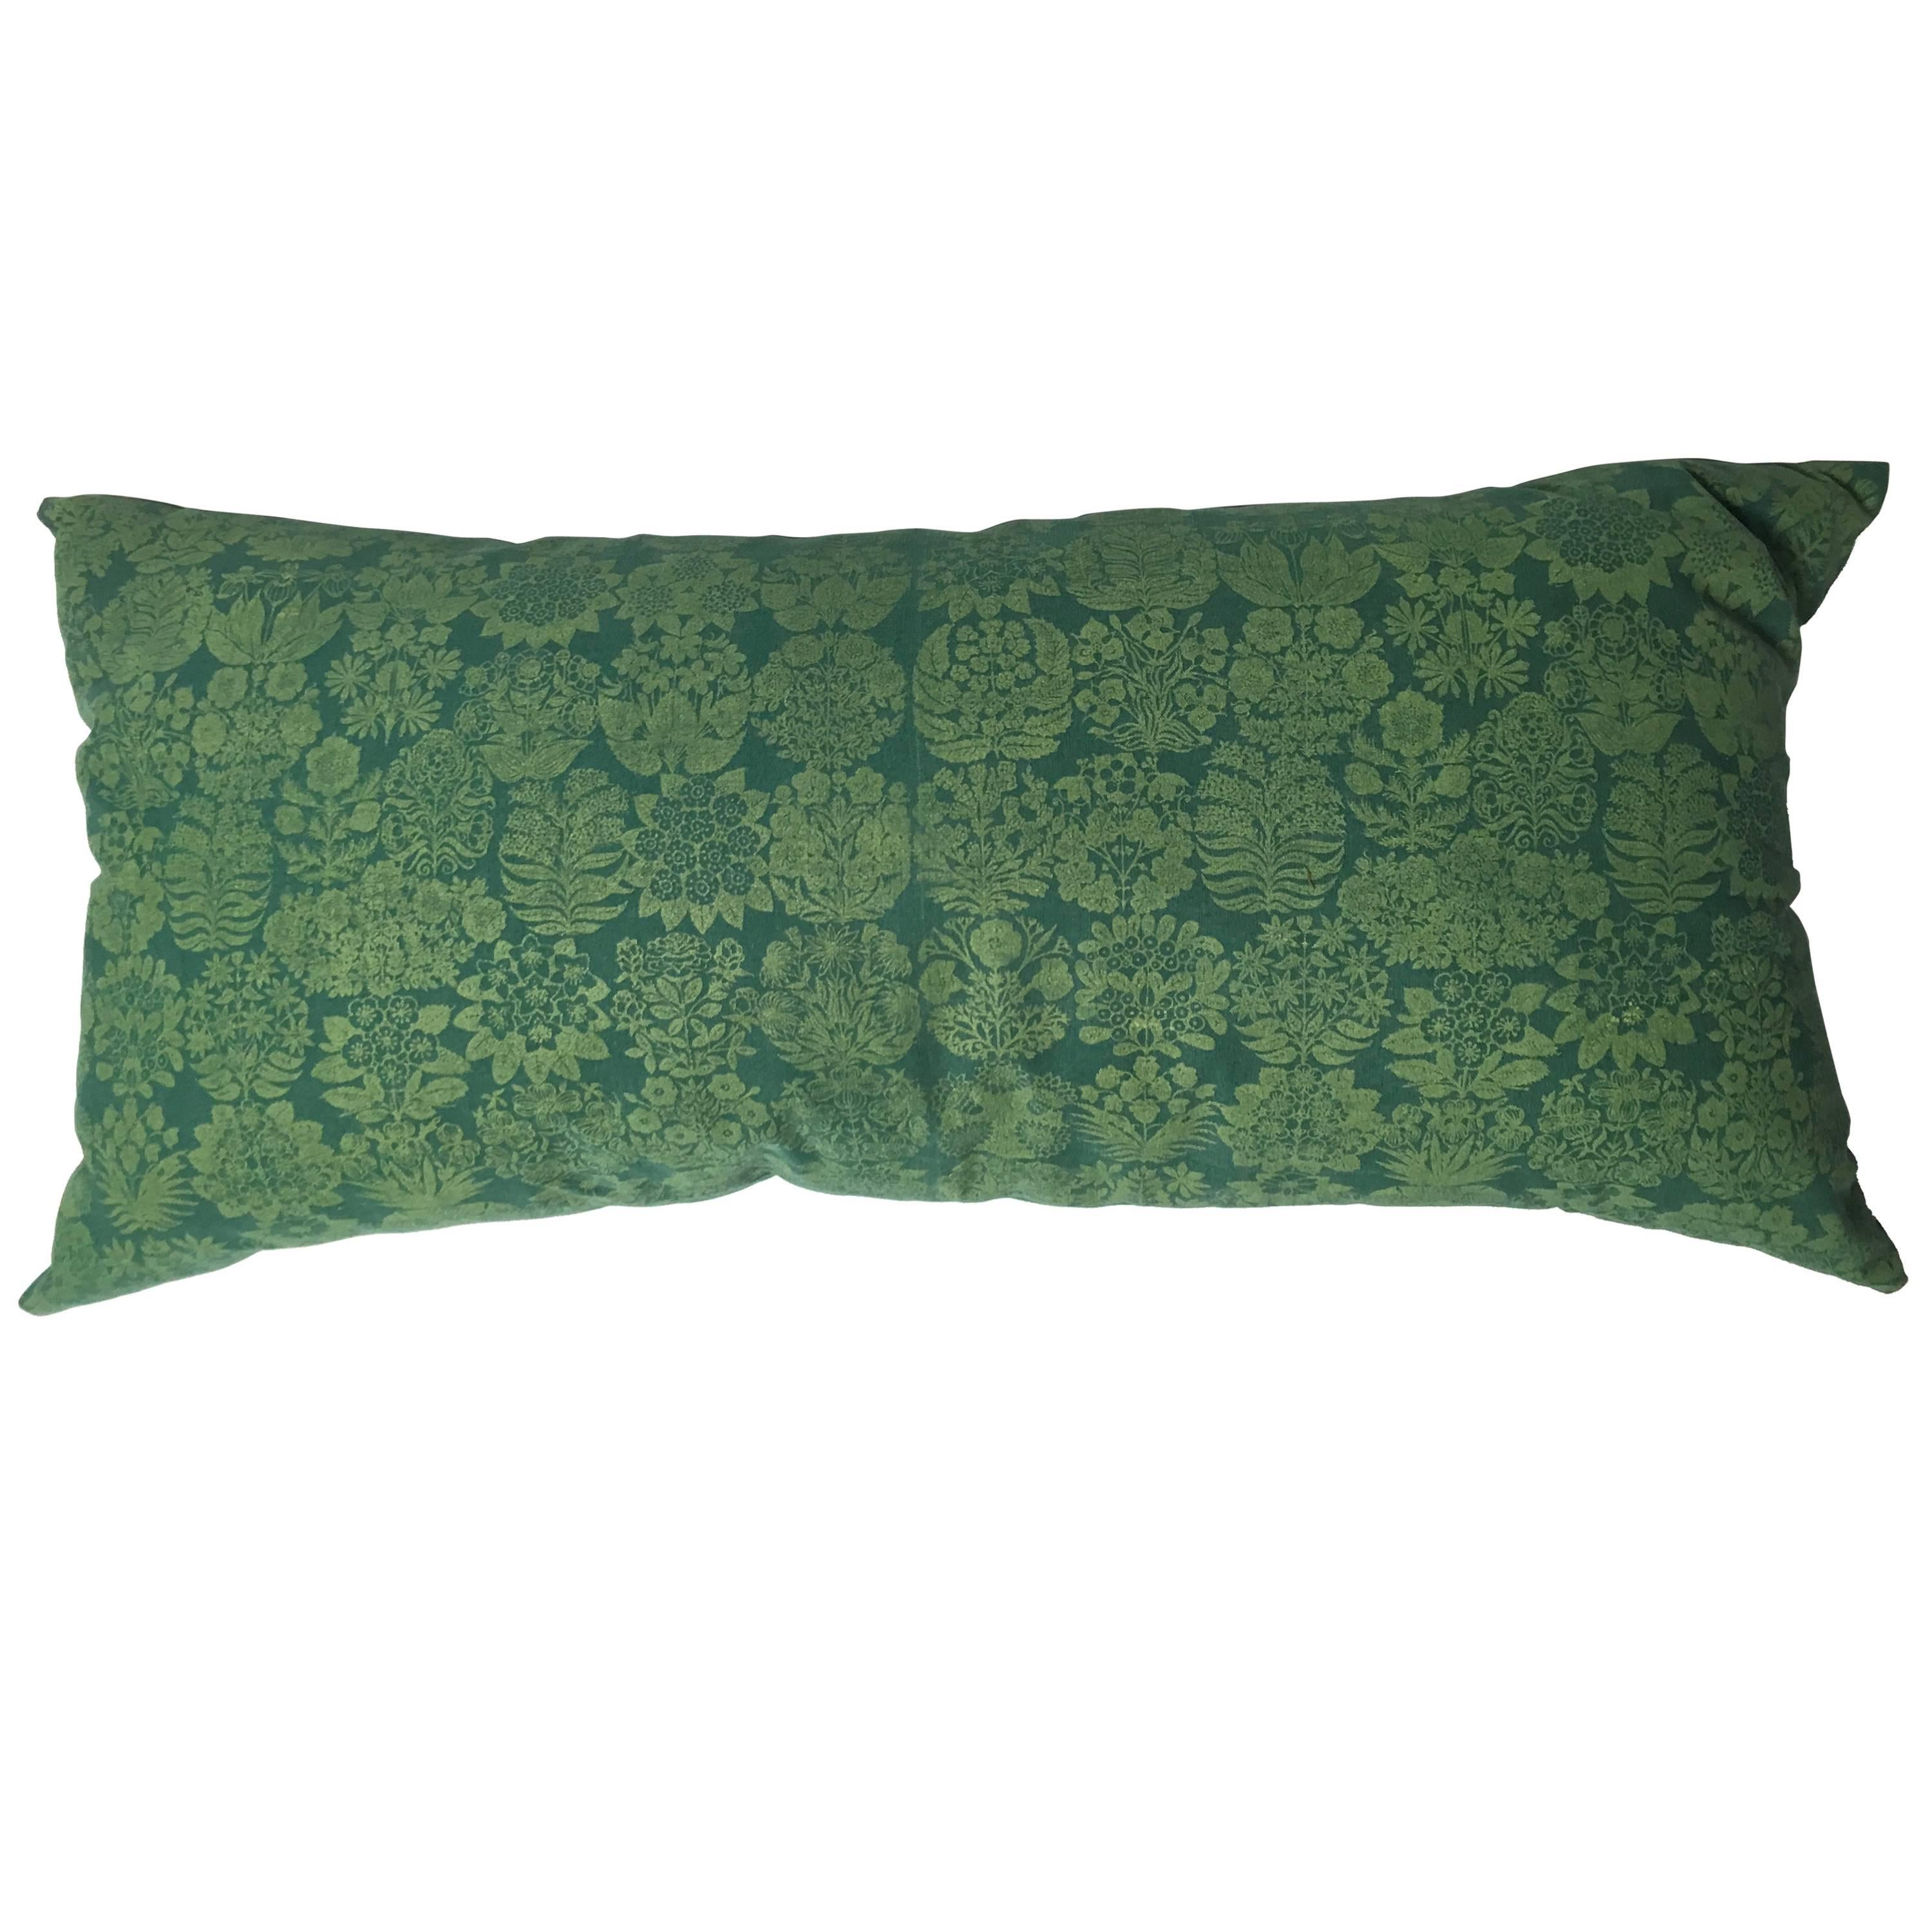 Folly Cove Designers Hand Block Printed Pillow with US State Flowers